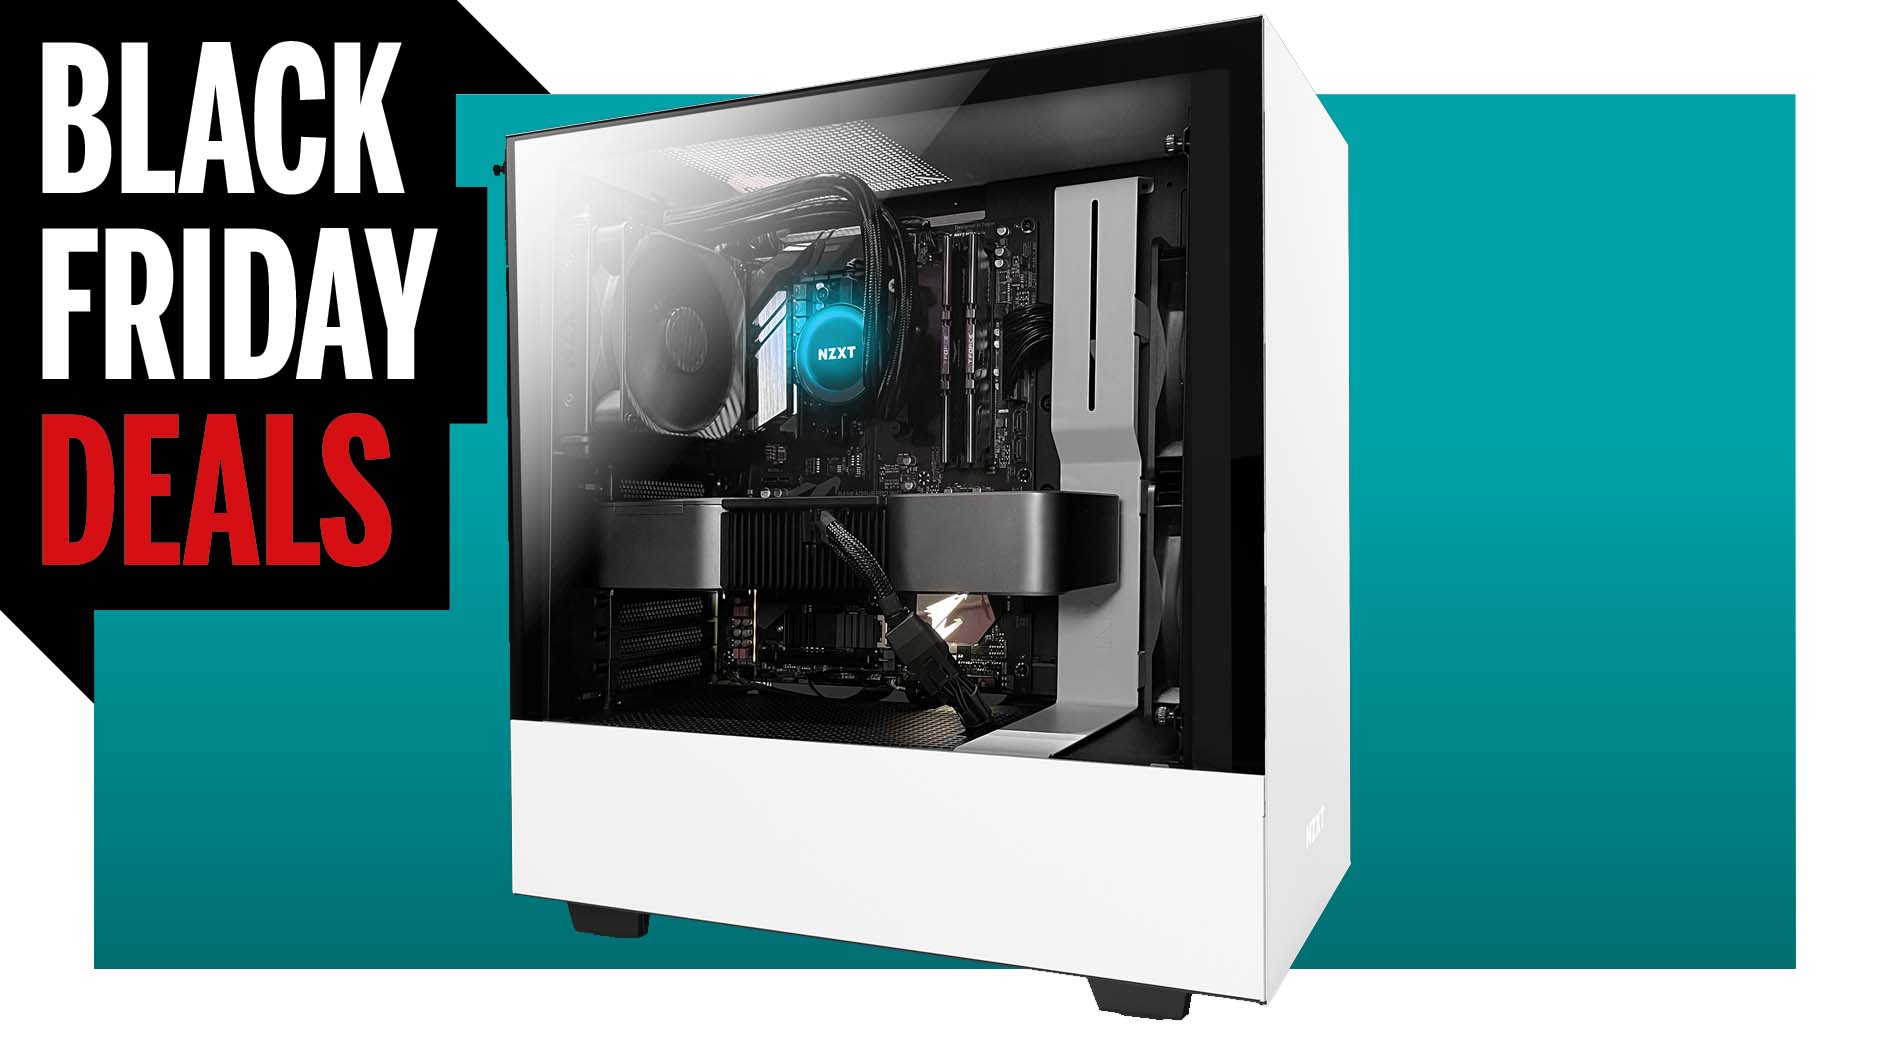 Buy One Of These 3 Black Friday Gaming PCs If You Want To Game At 1440p & 144Hz thumbnail